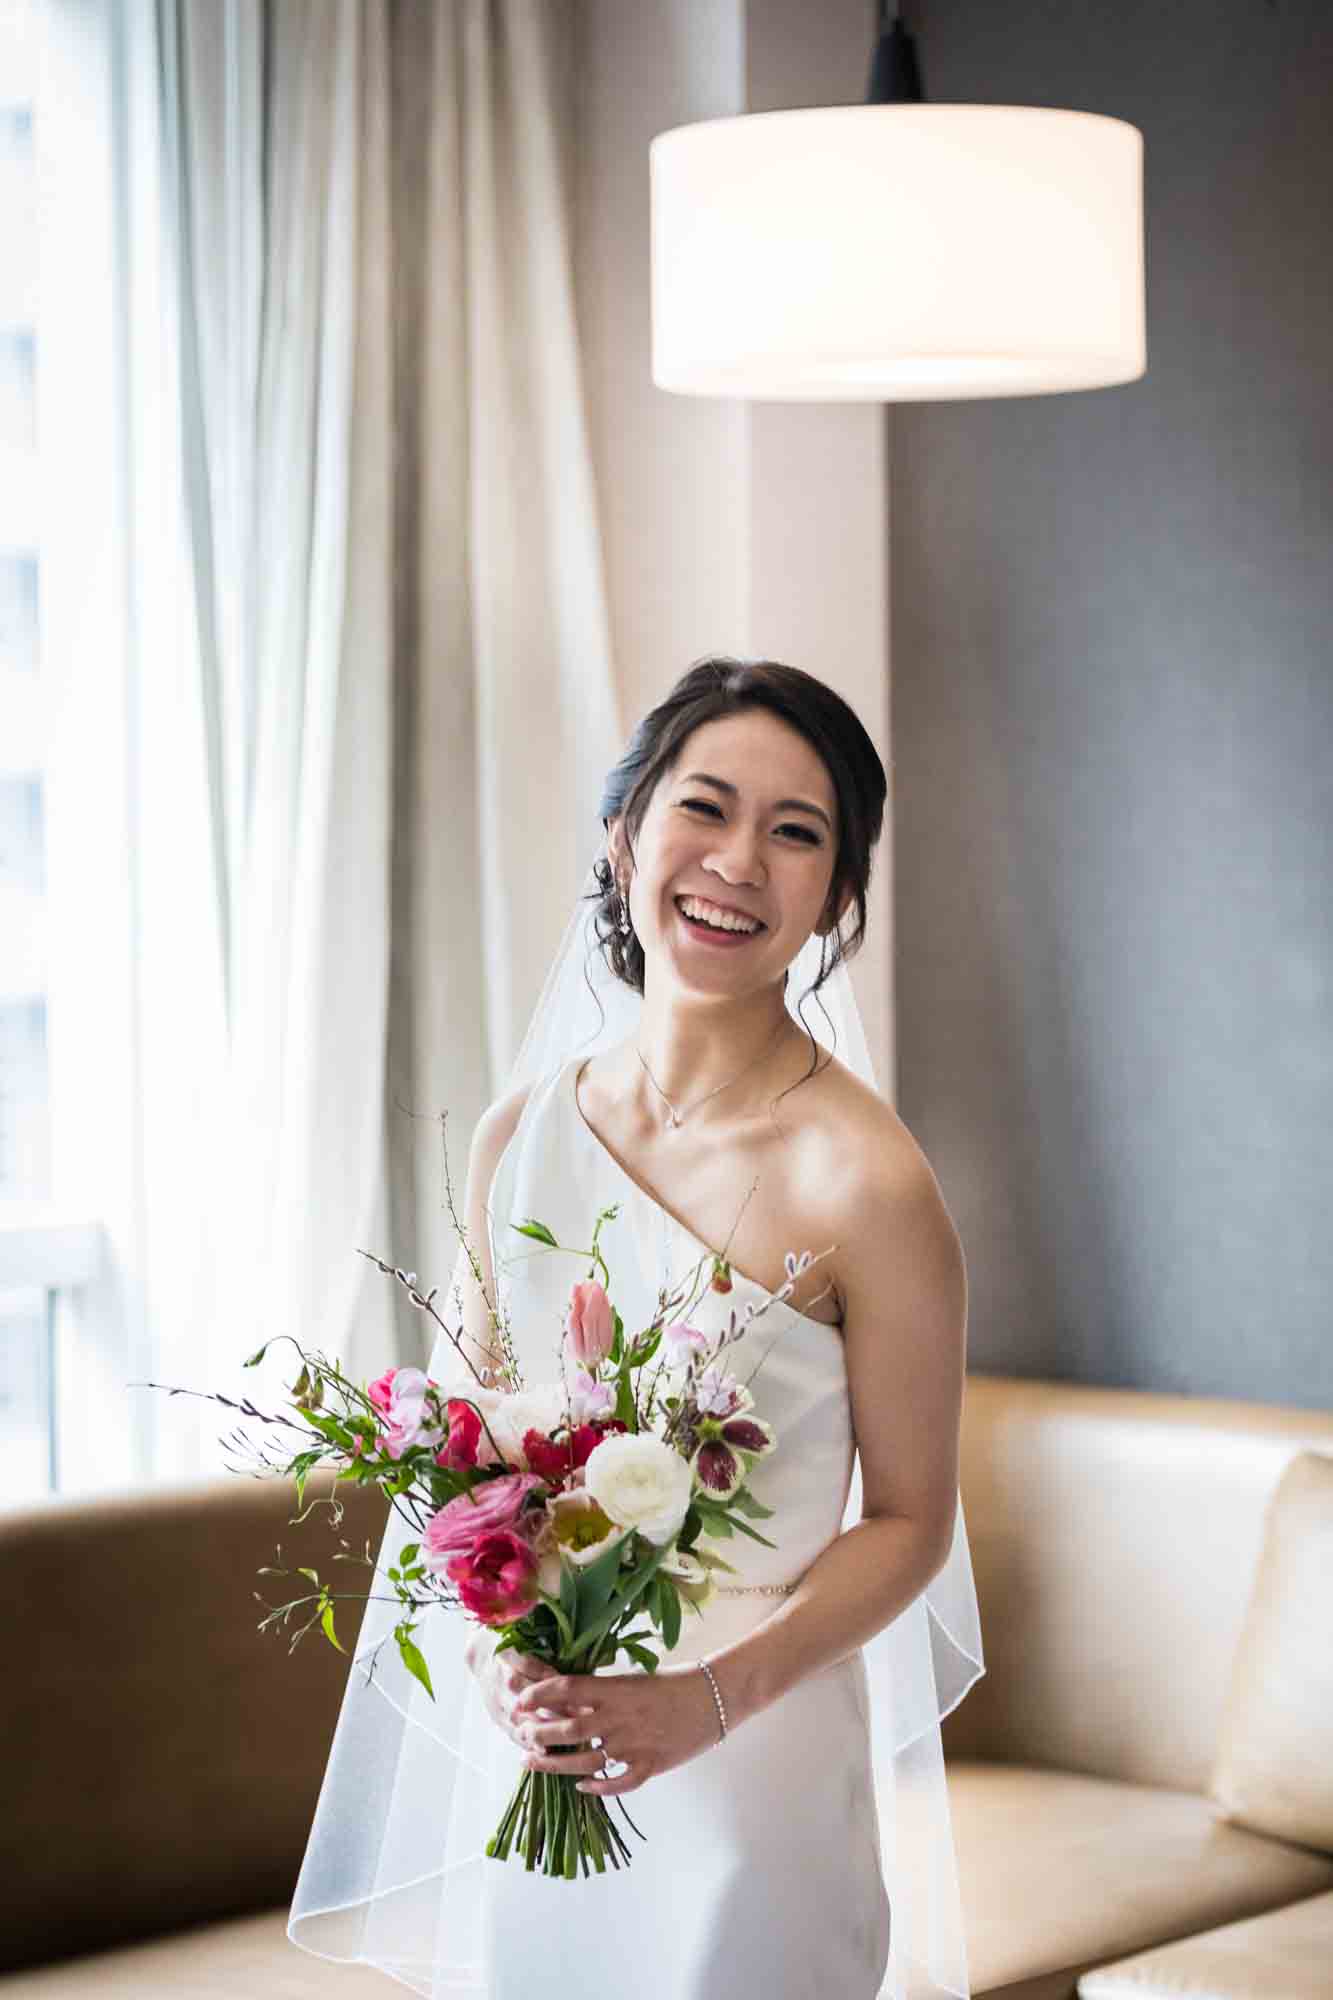 Bride laughing wearing one-shoulder dress and holding flowers